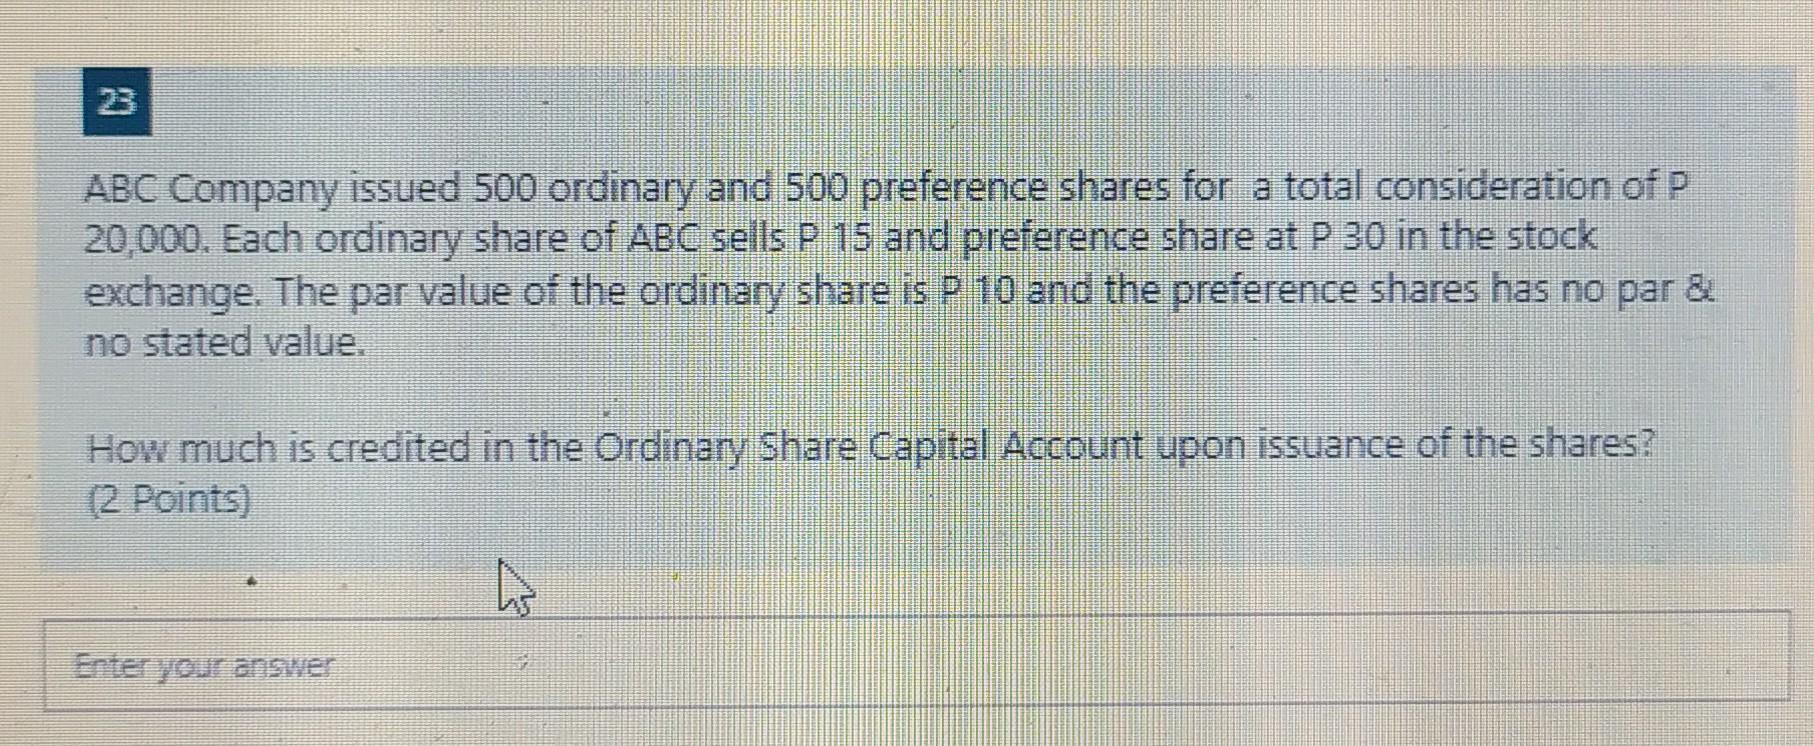 ABC Company issued 500 ordinary and 500 preference shares for a total consideration of p 20,000. Each ordinary share of ABC s